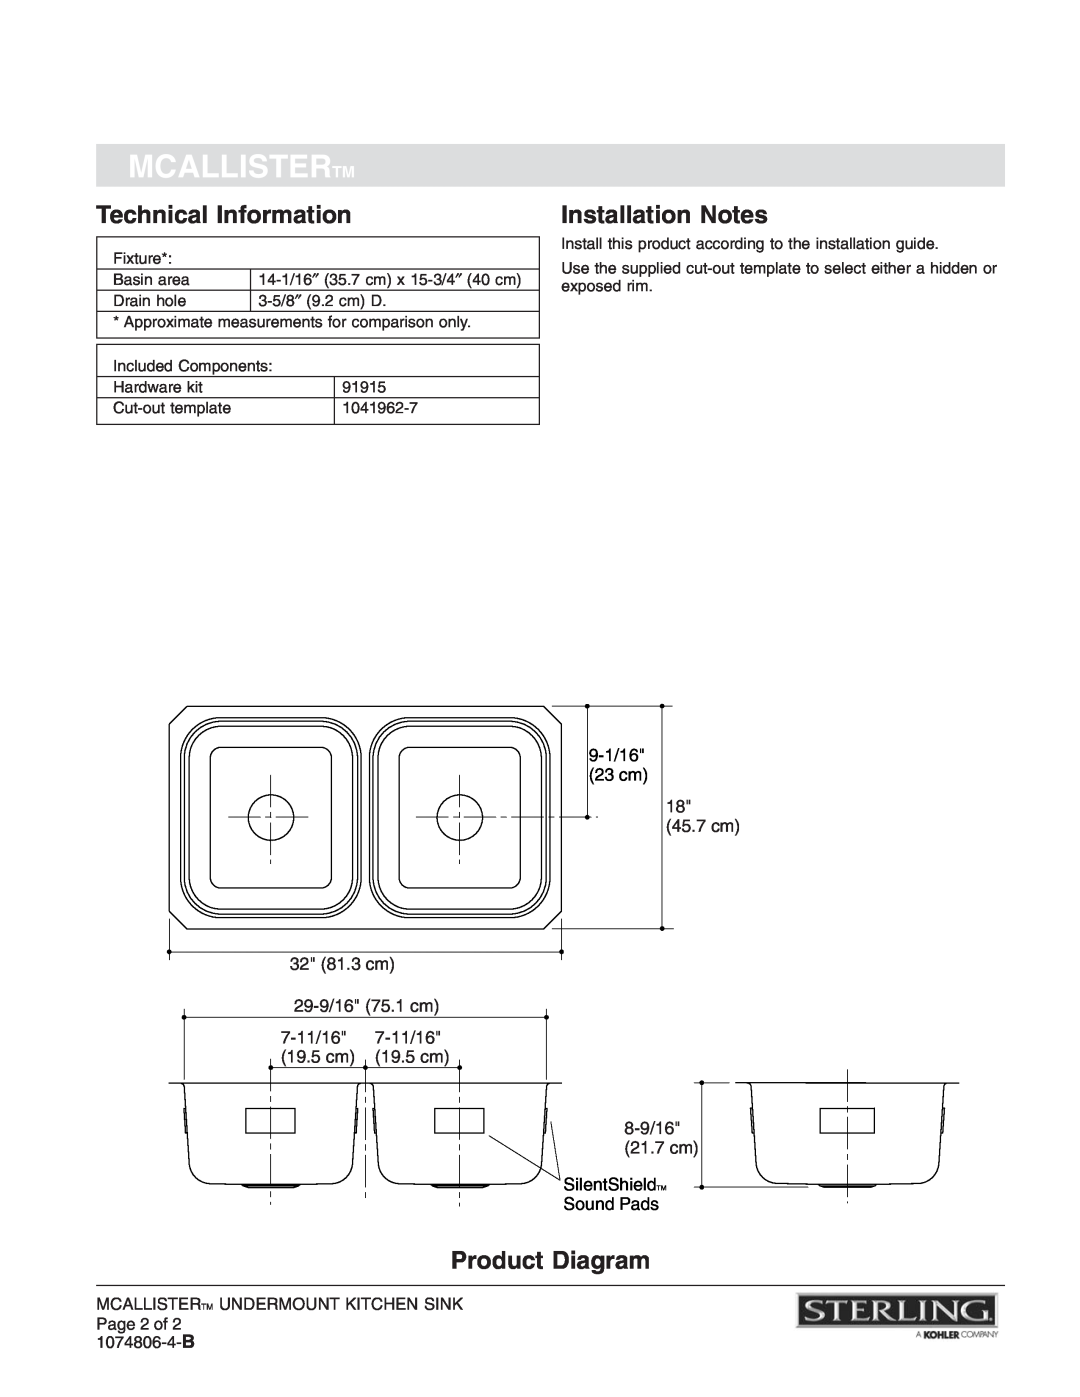 Sterling Plumbing 11444-NA Technical Information, Installation Notes, Product Diagram, Mcallistertm, 9-1/16 23 cm 